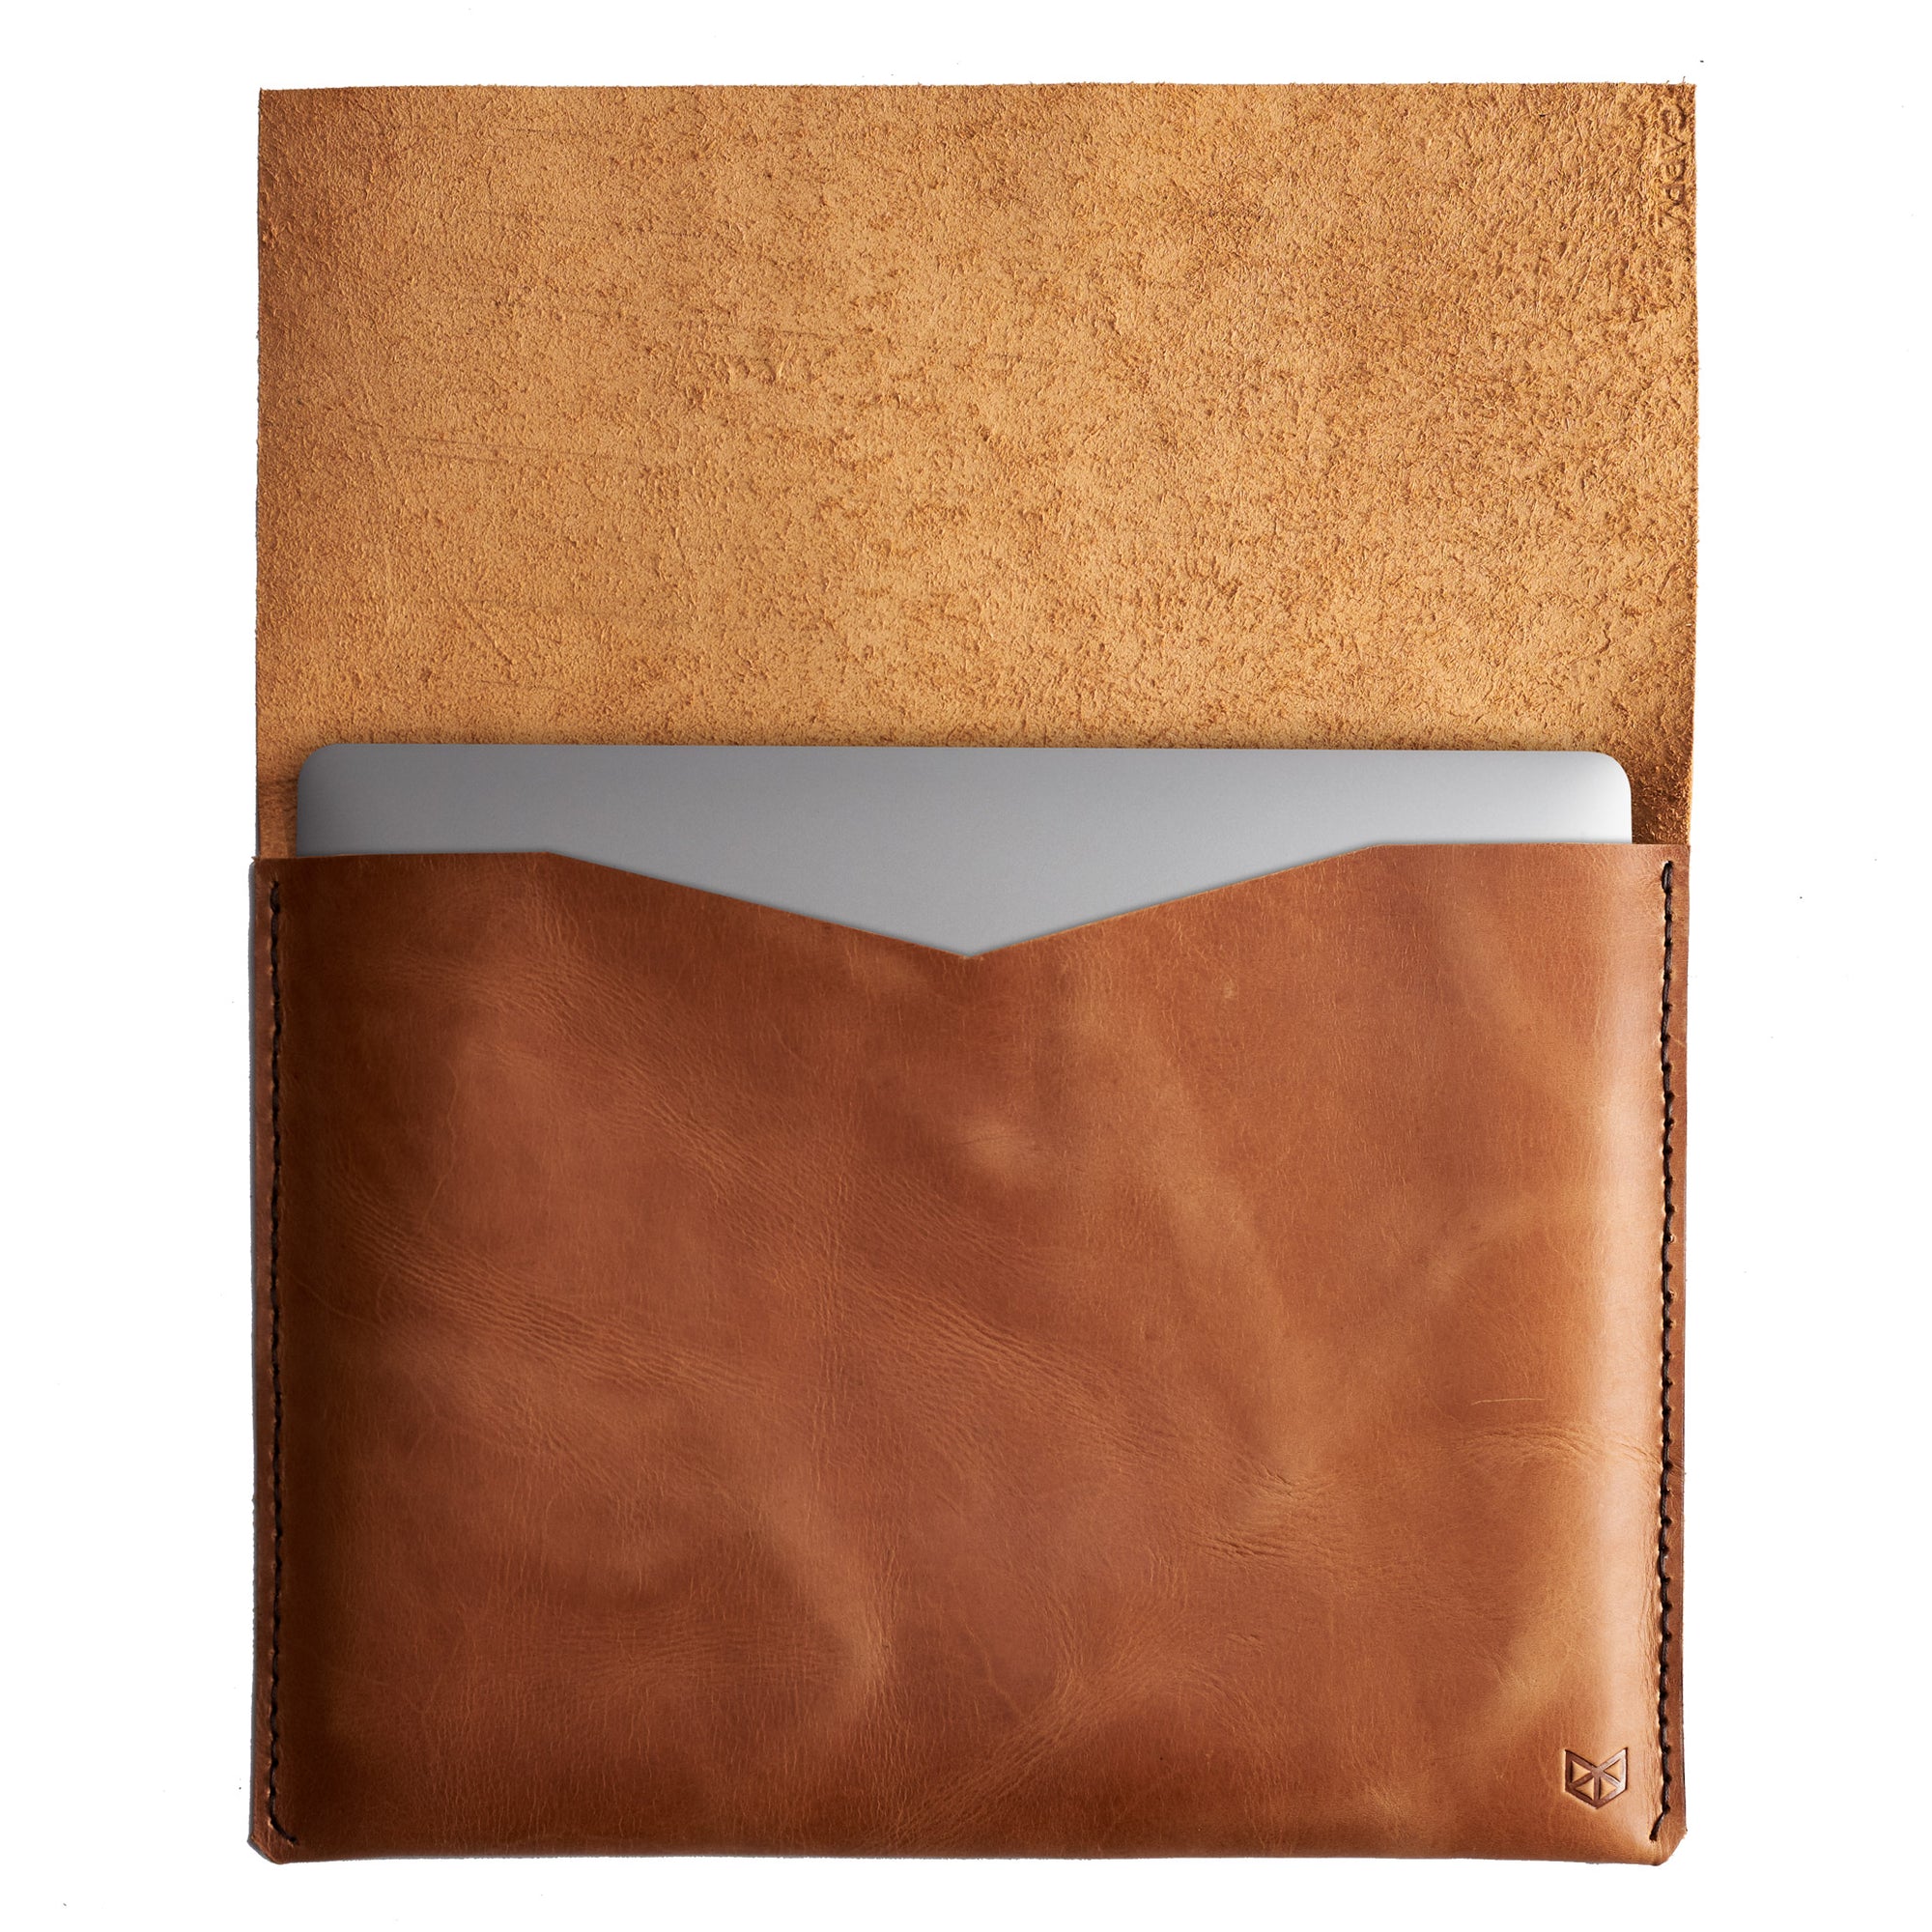 Soft interior sleeve. Leather Dell XPS Sleeve Case by Capra Leather